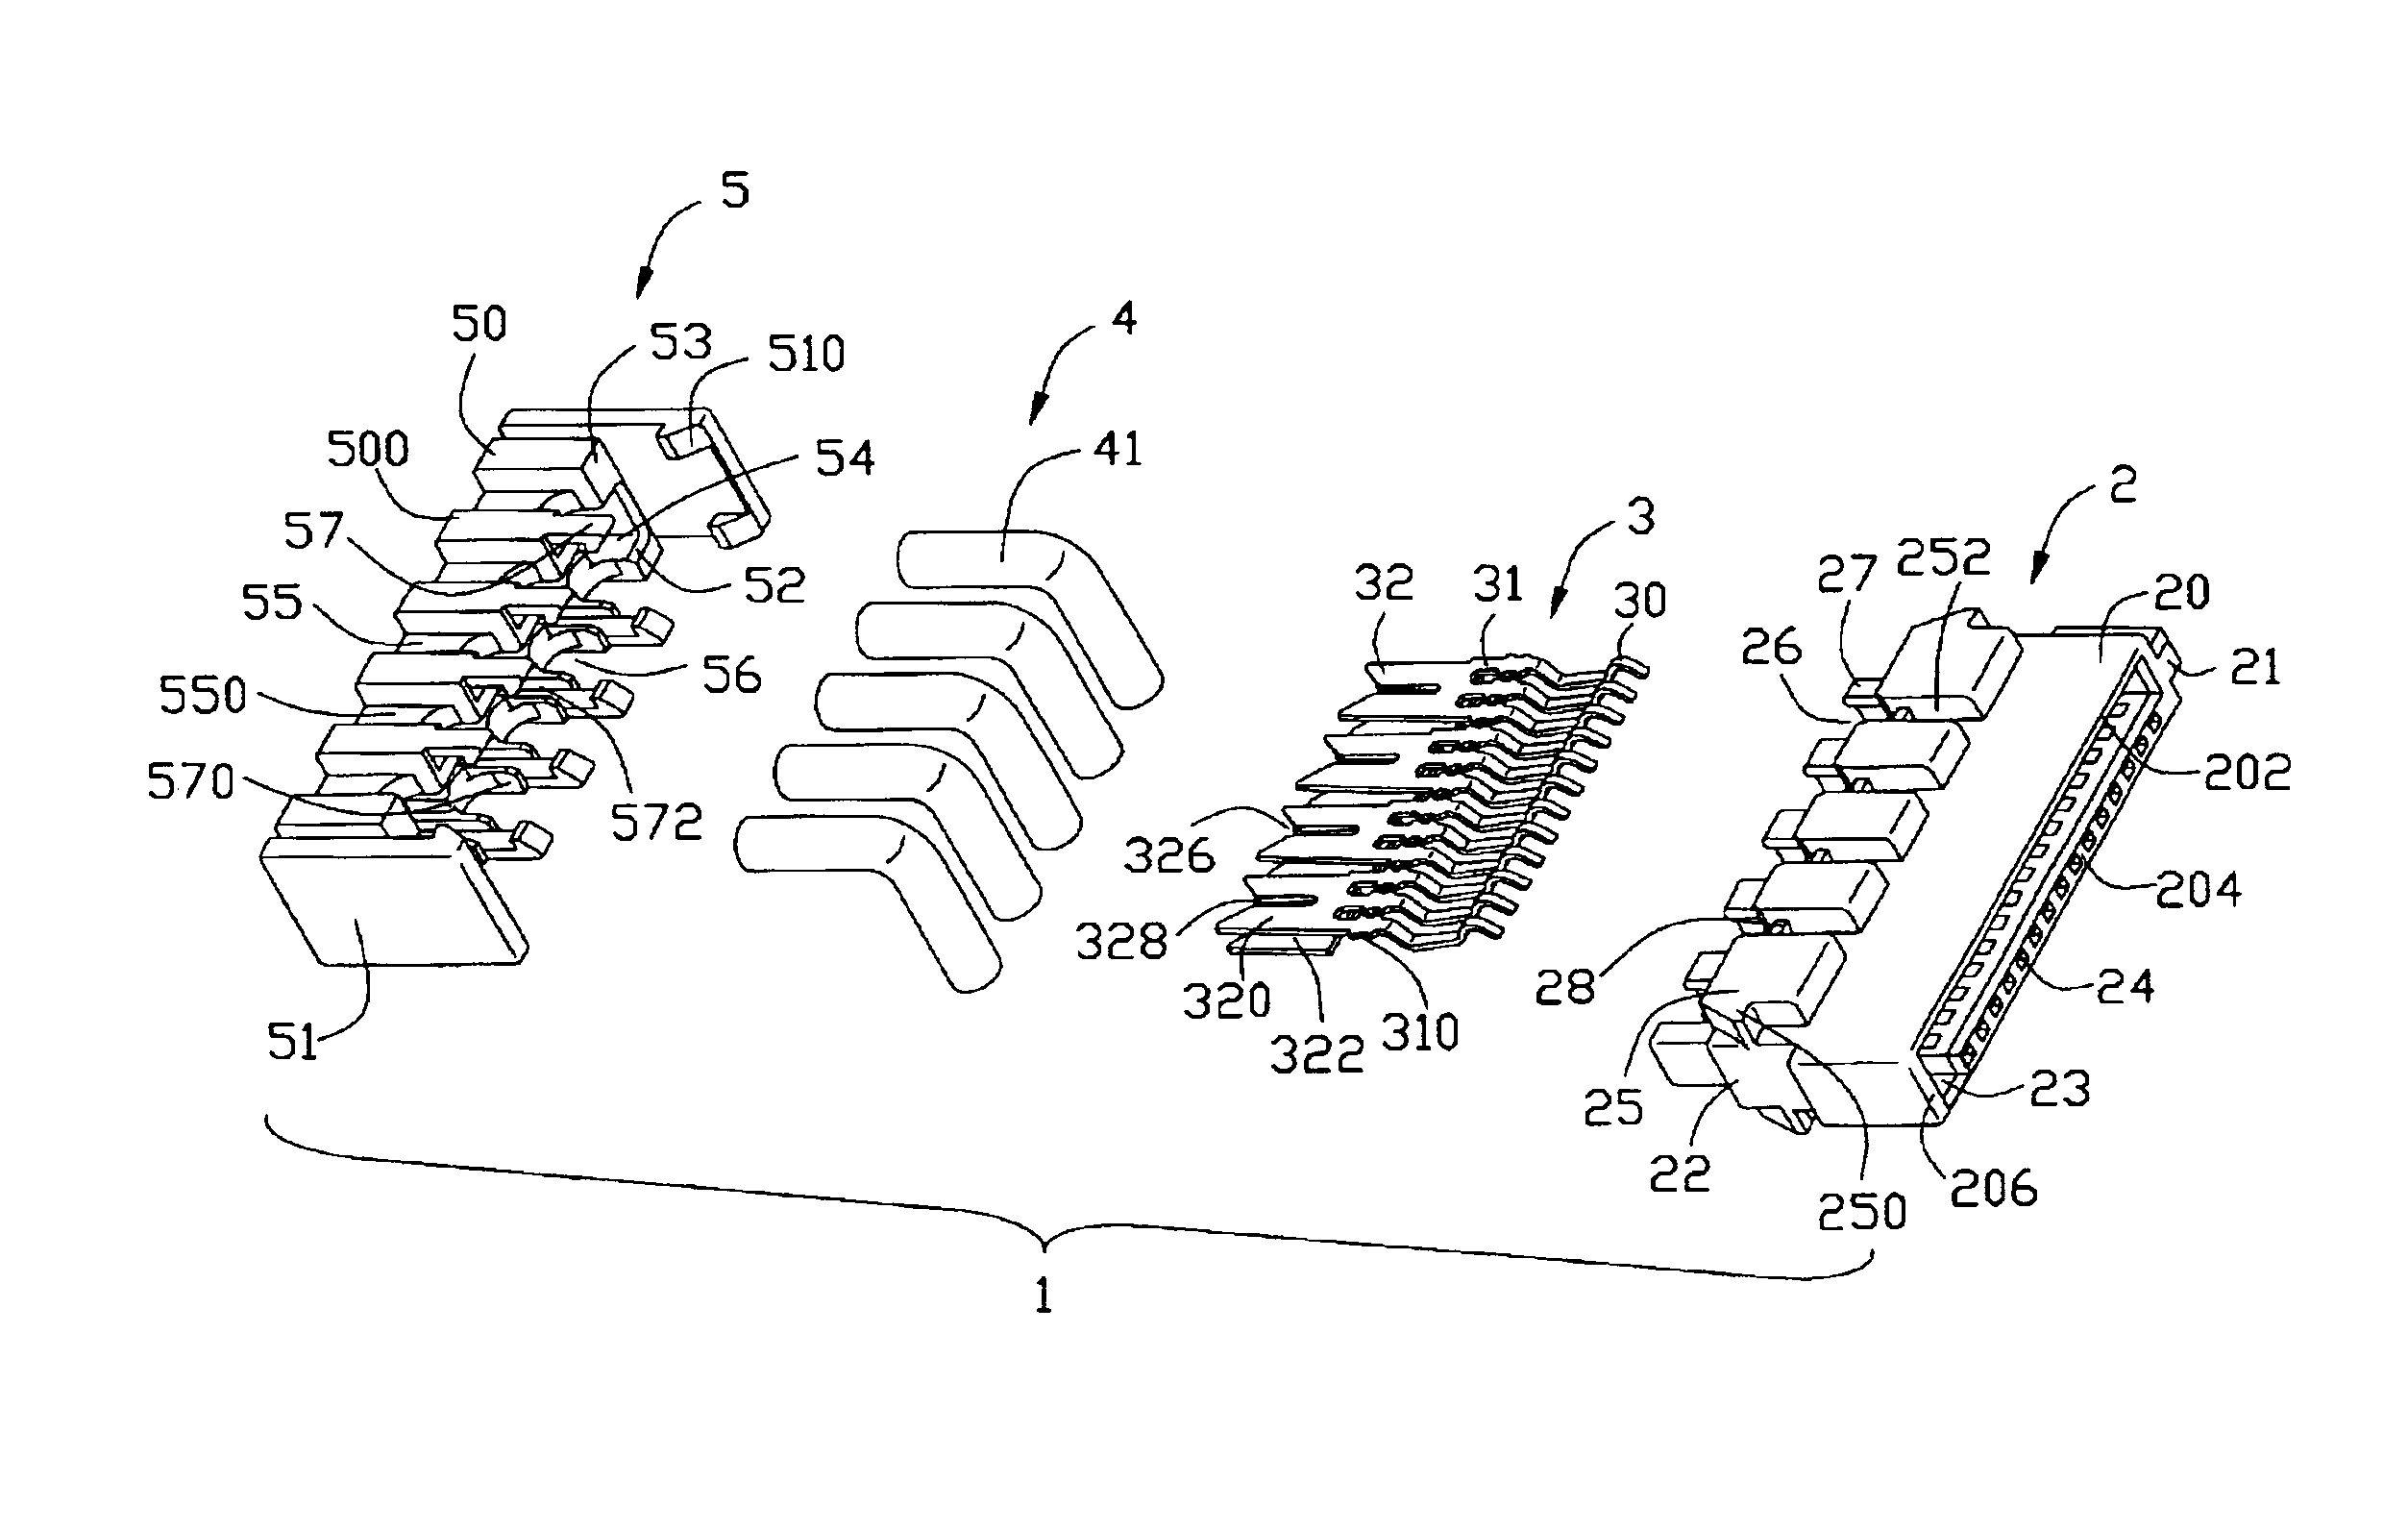 Cable connector assembly with latching means